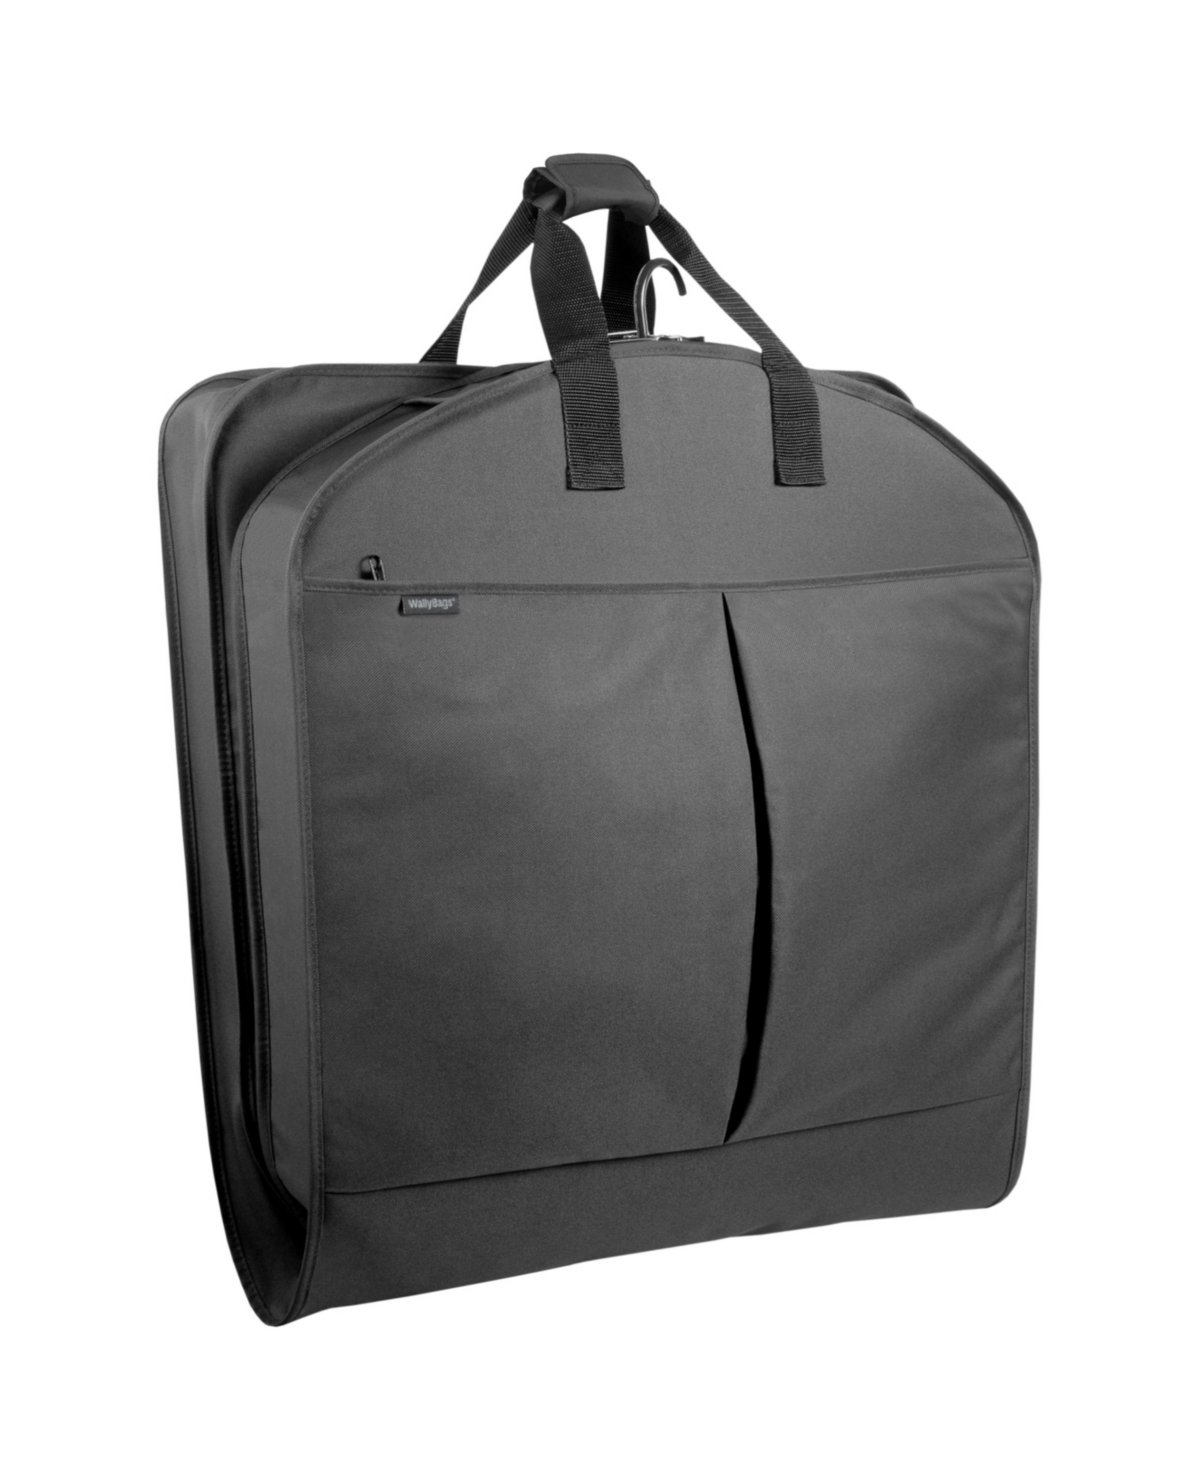 45" Deluxe Extra Capacity Travel Garment Bag with Accessory Pockets - Gray